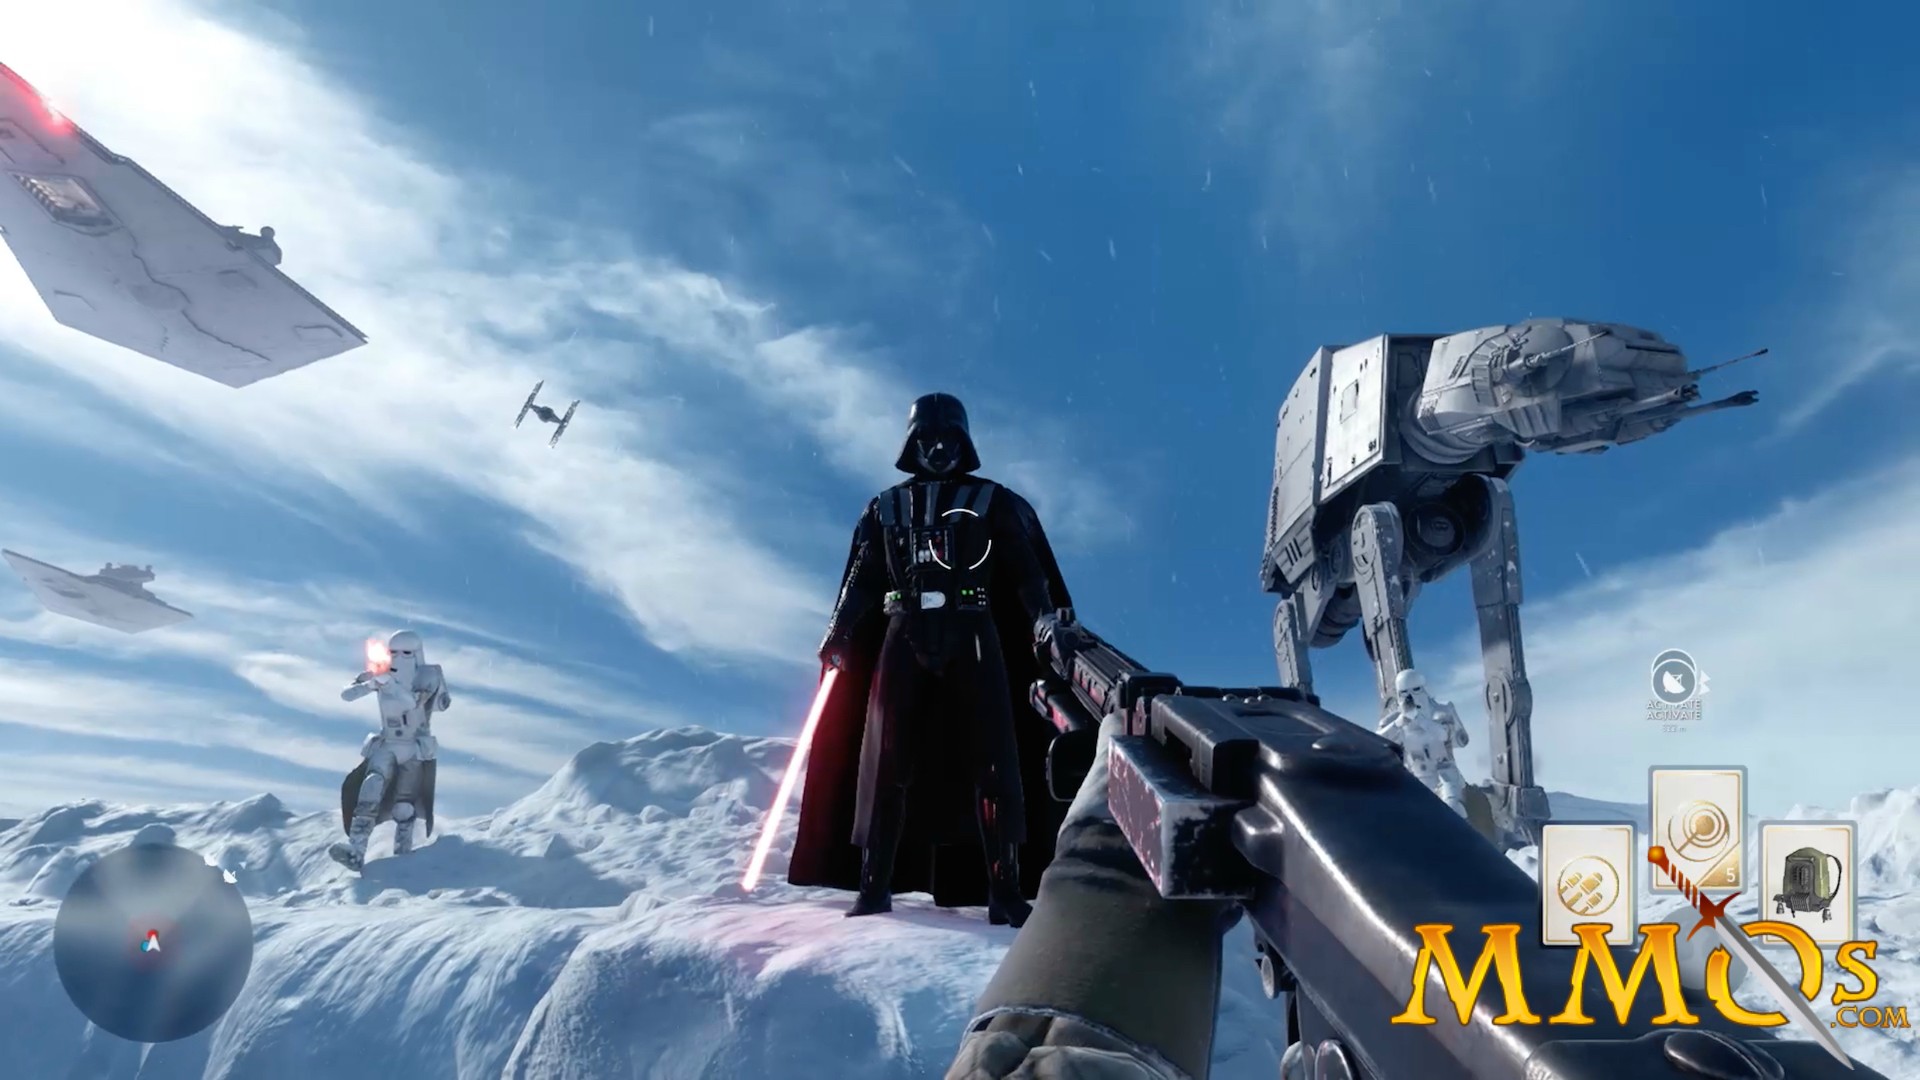 Star Wars Battlefront Beta: Armed and Operational - UPDATED!